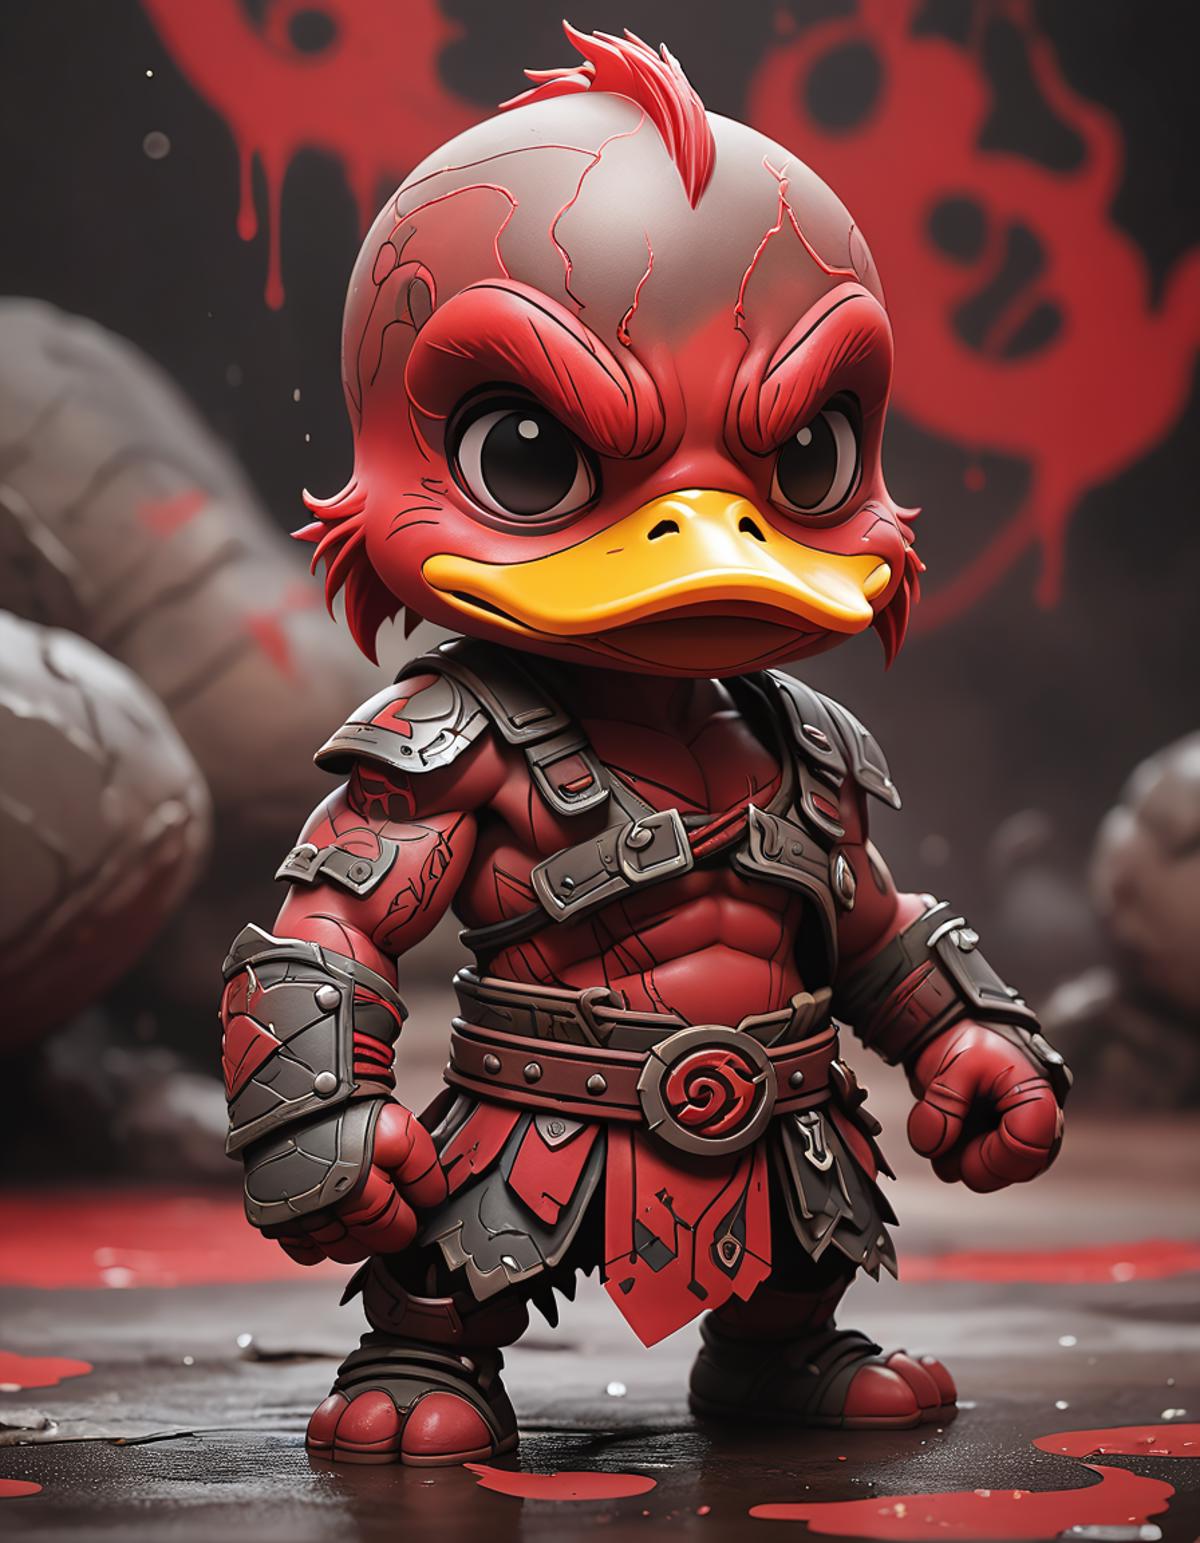 A red ducky figurine with a sword and shield, standing on a red background.